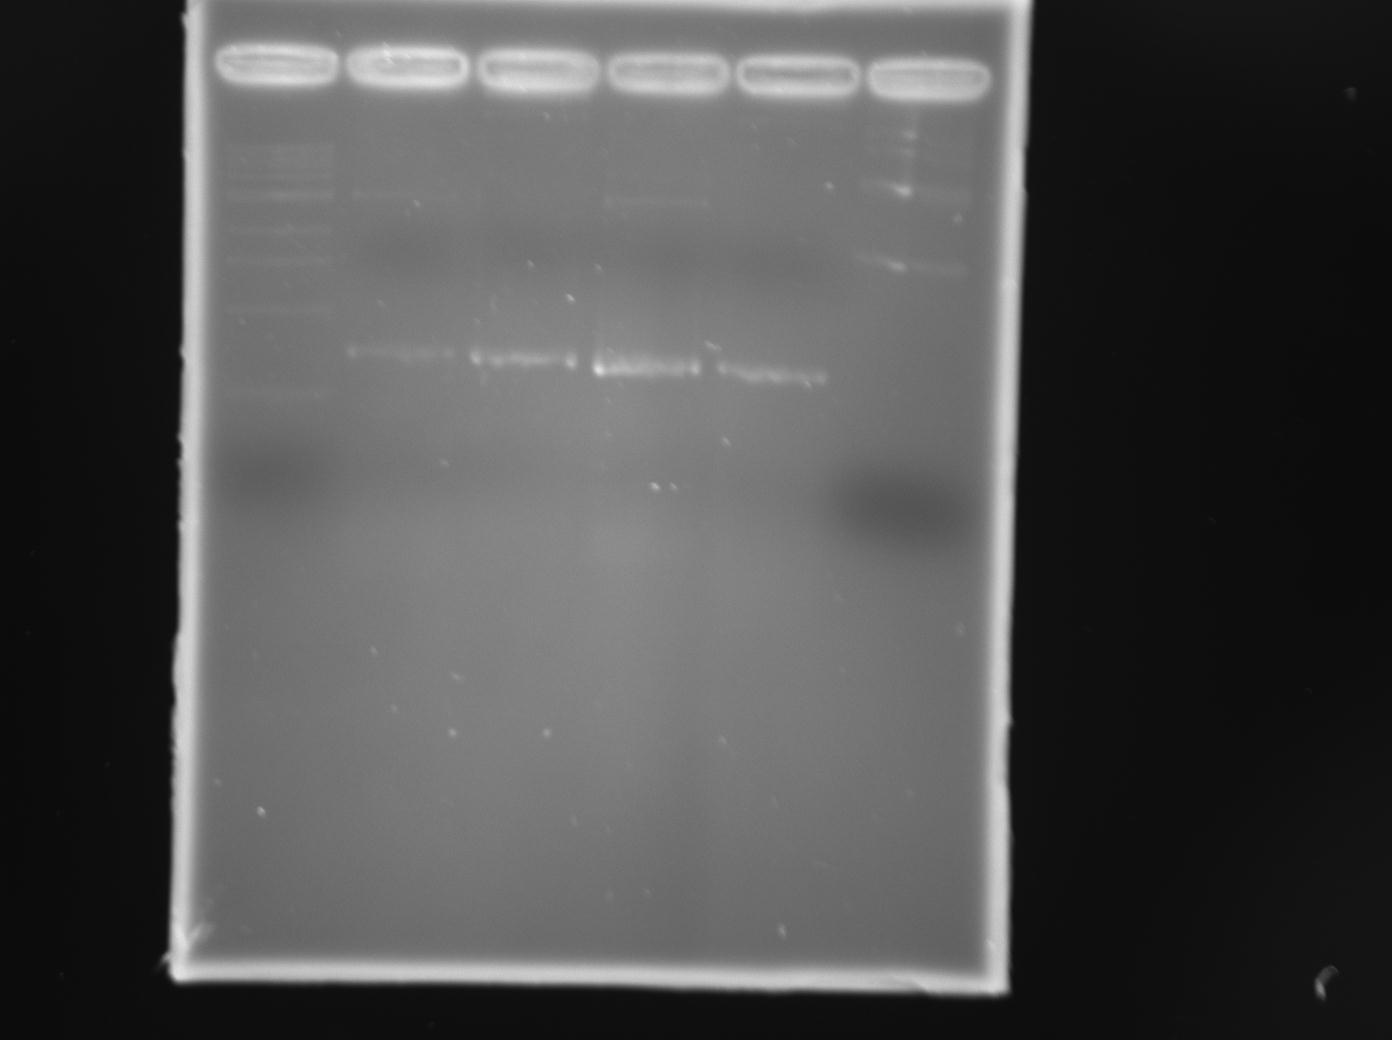 08-20-12 TraR PCR products from pCF222 and pCF251 SUCCESS (Lane 6 elsa plasmid).jpg